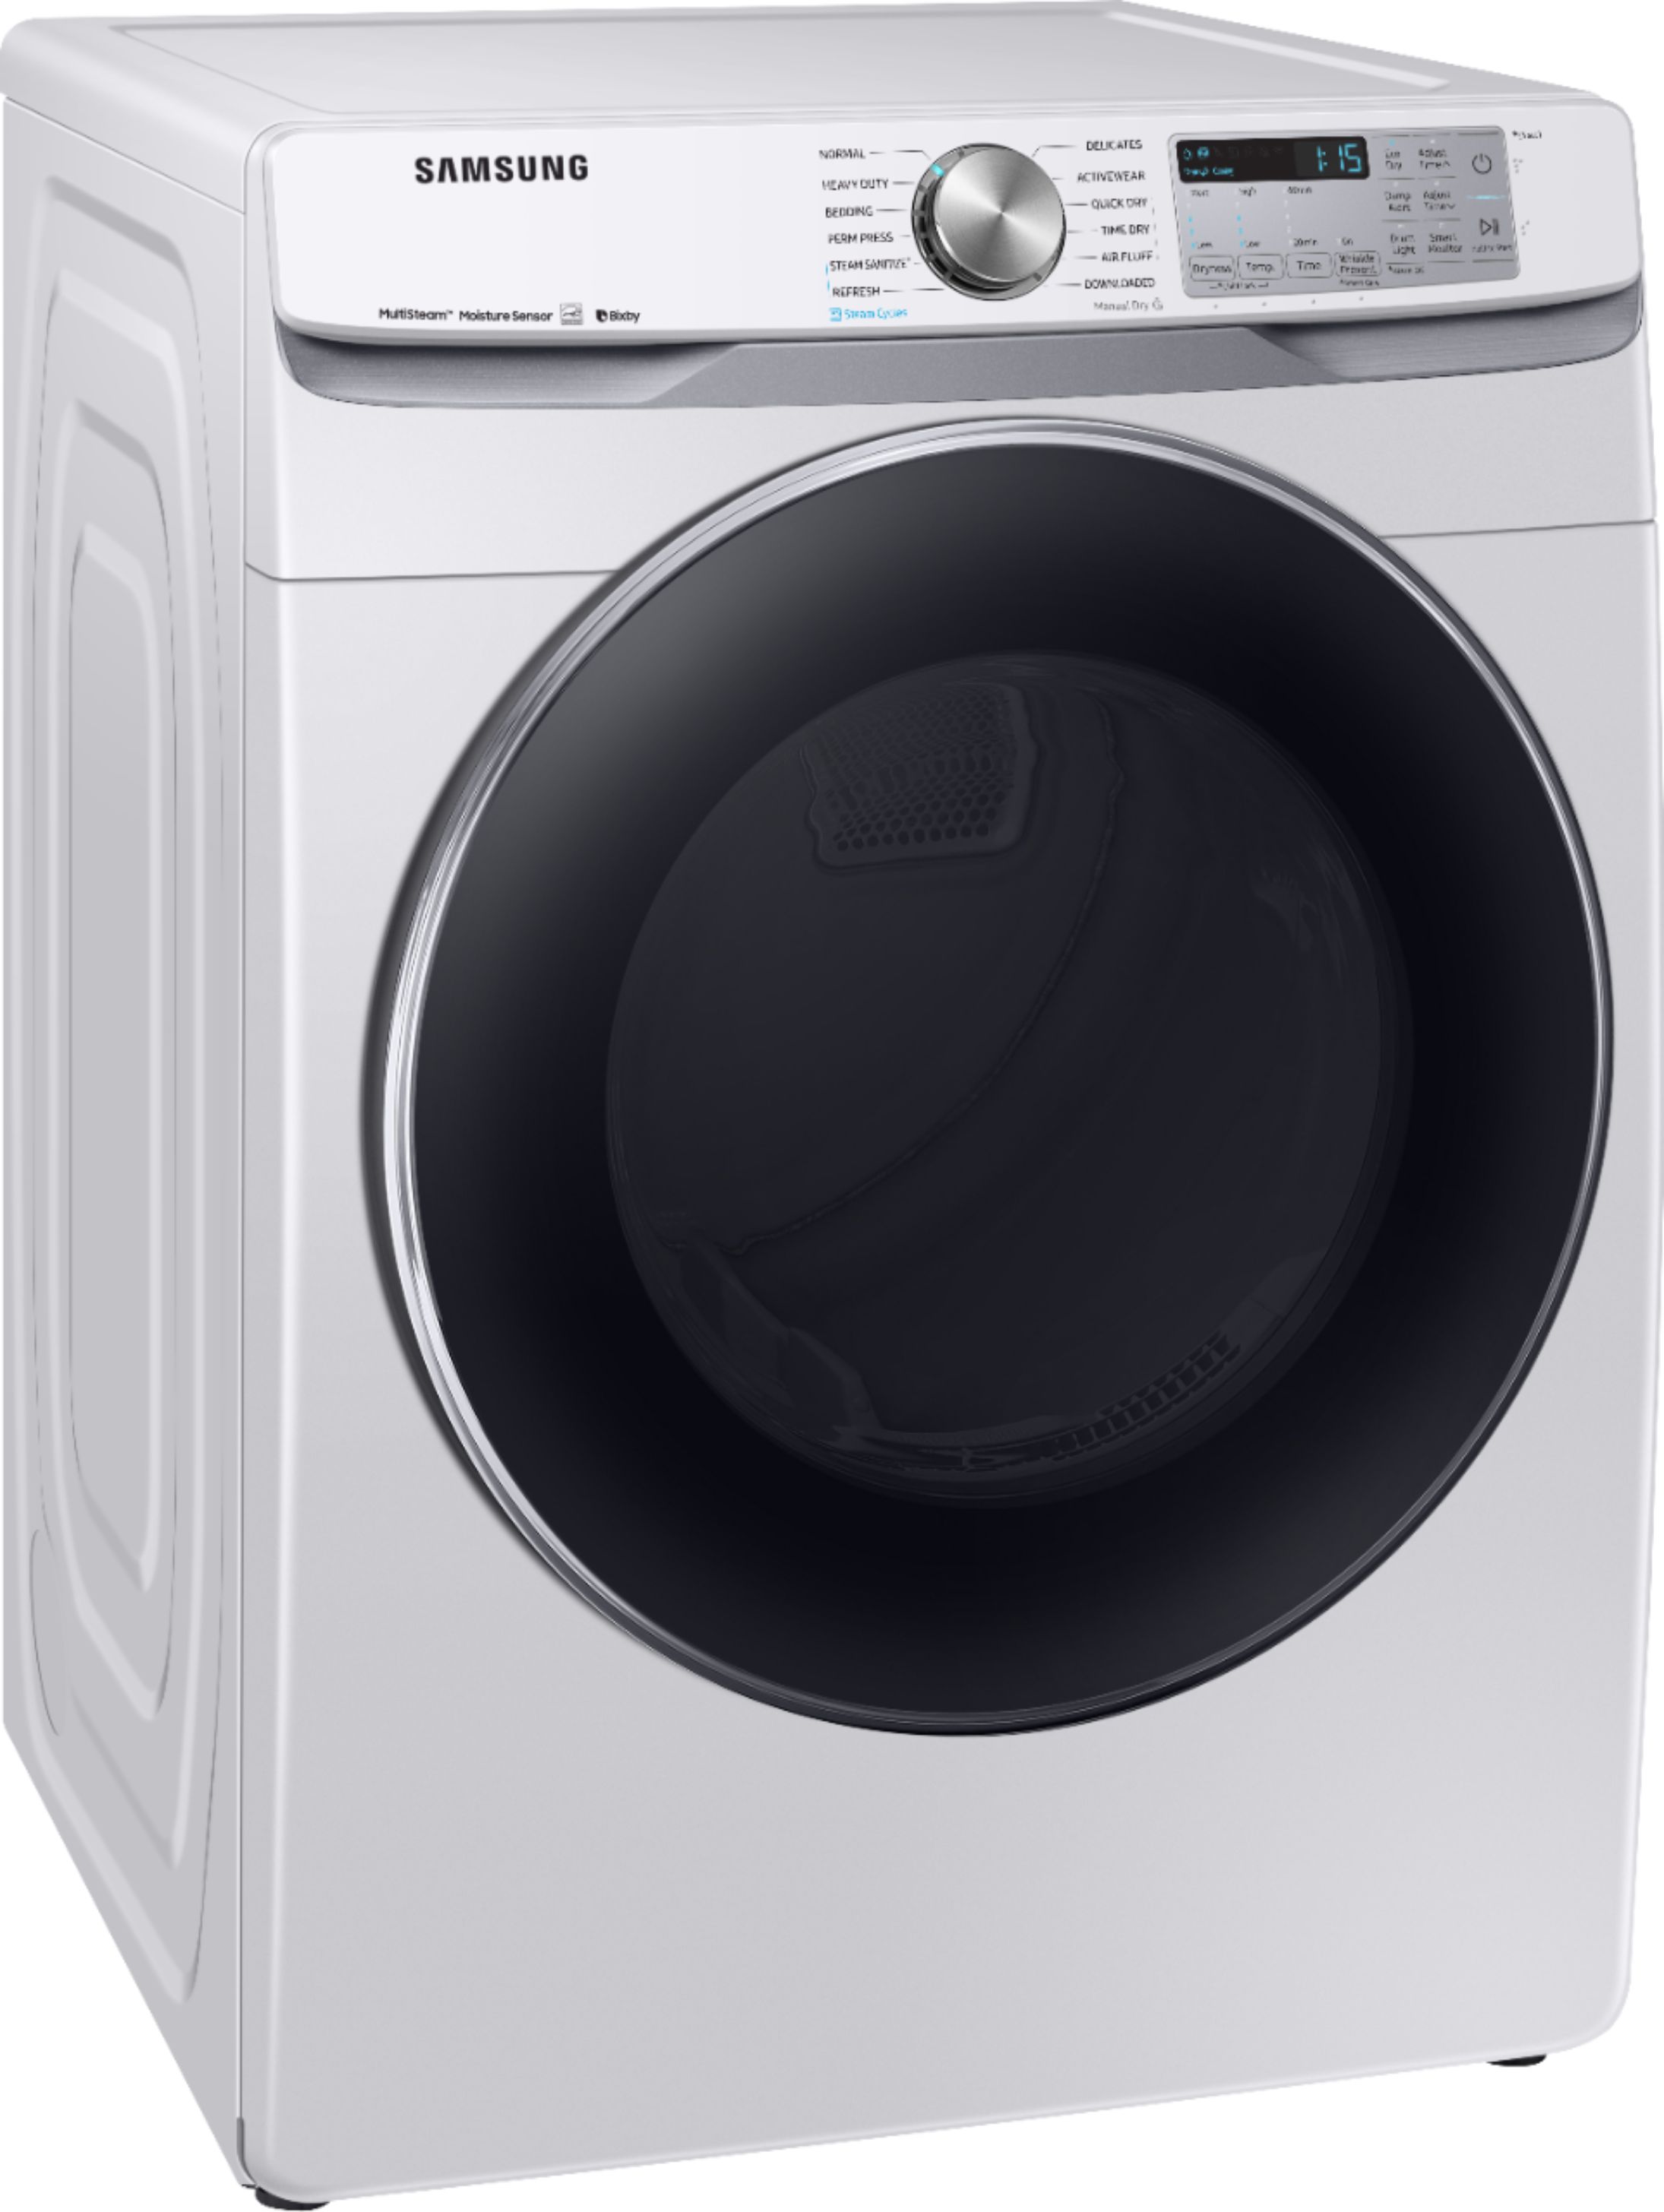 Angle View: Samsung - 7.5 Cu. Ft. Stackable Smart Electric Dryer with Steam and Sensor Dry - White